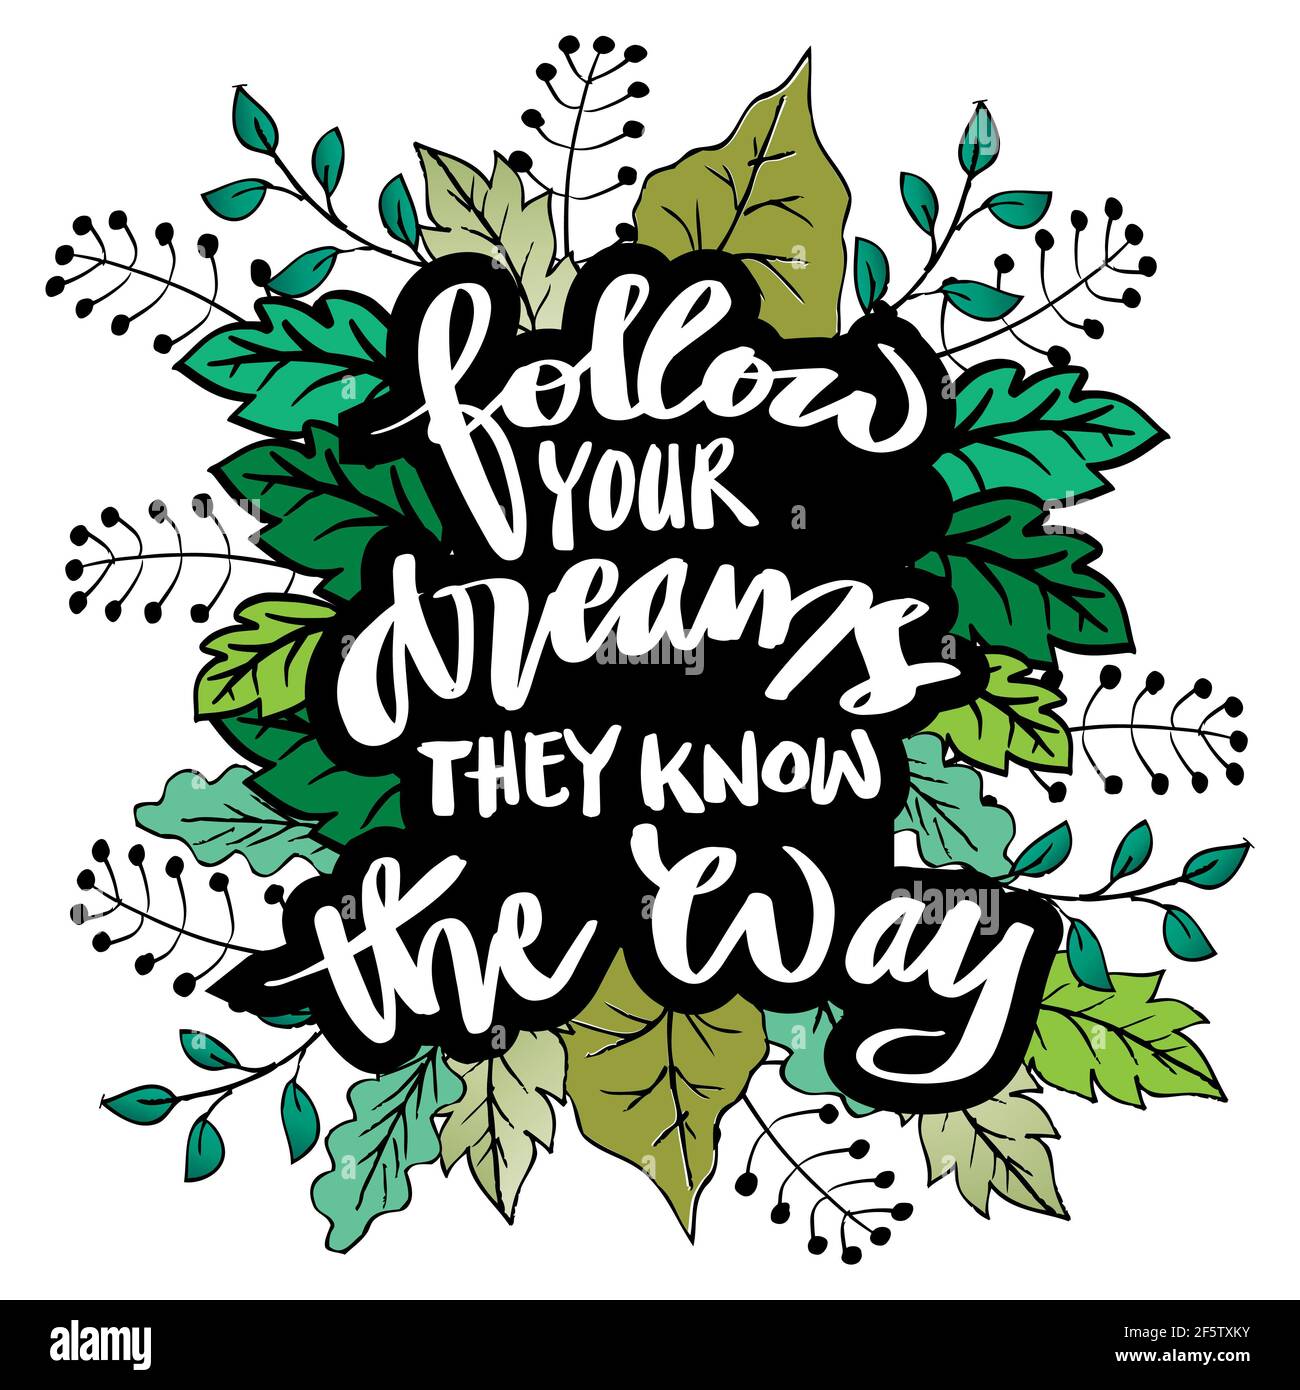 Follow your dreams they know the way hand lettering. Inspirational and Motivational Quotes. Stock Photo